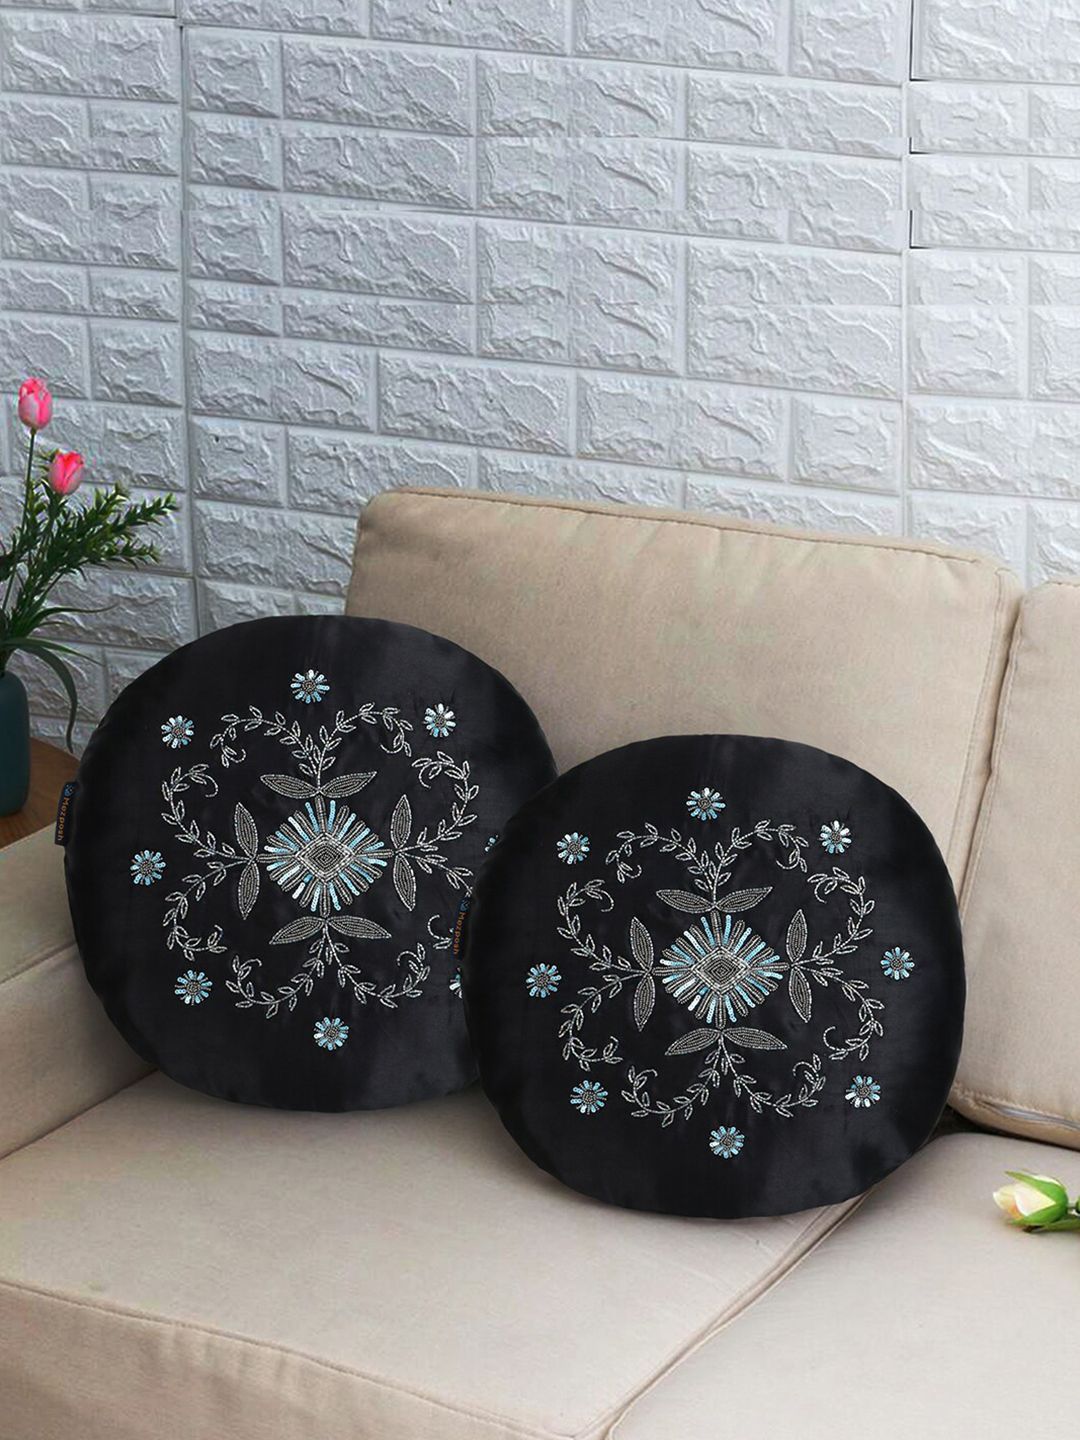 Mezposh Black & Silver-Toned Embellished Floral Satin Round Cushion Covers Set of 2 Price in India